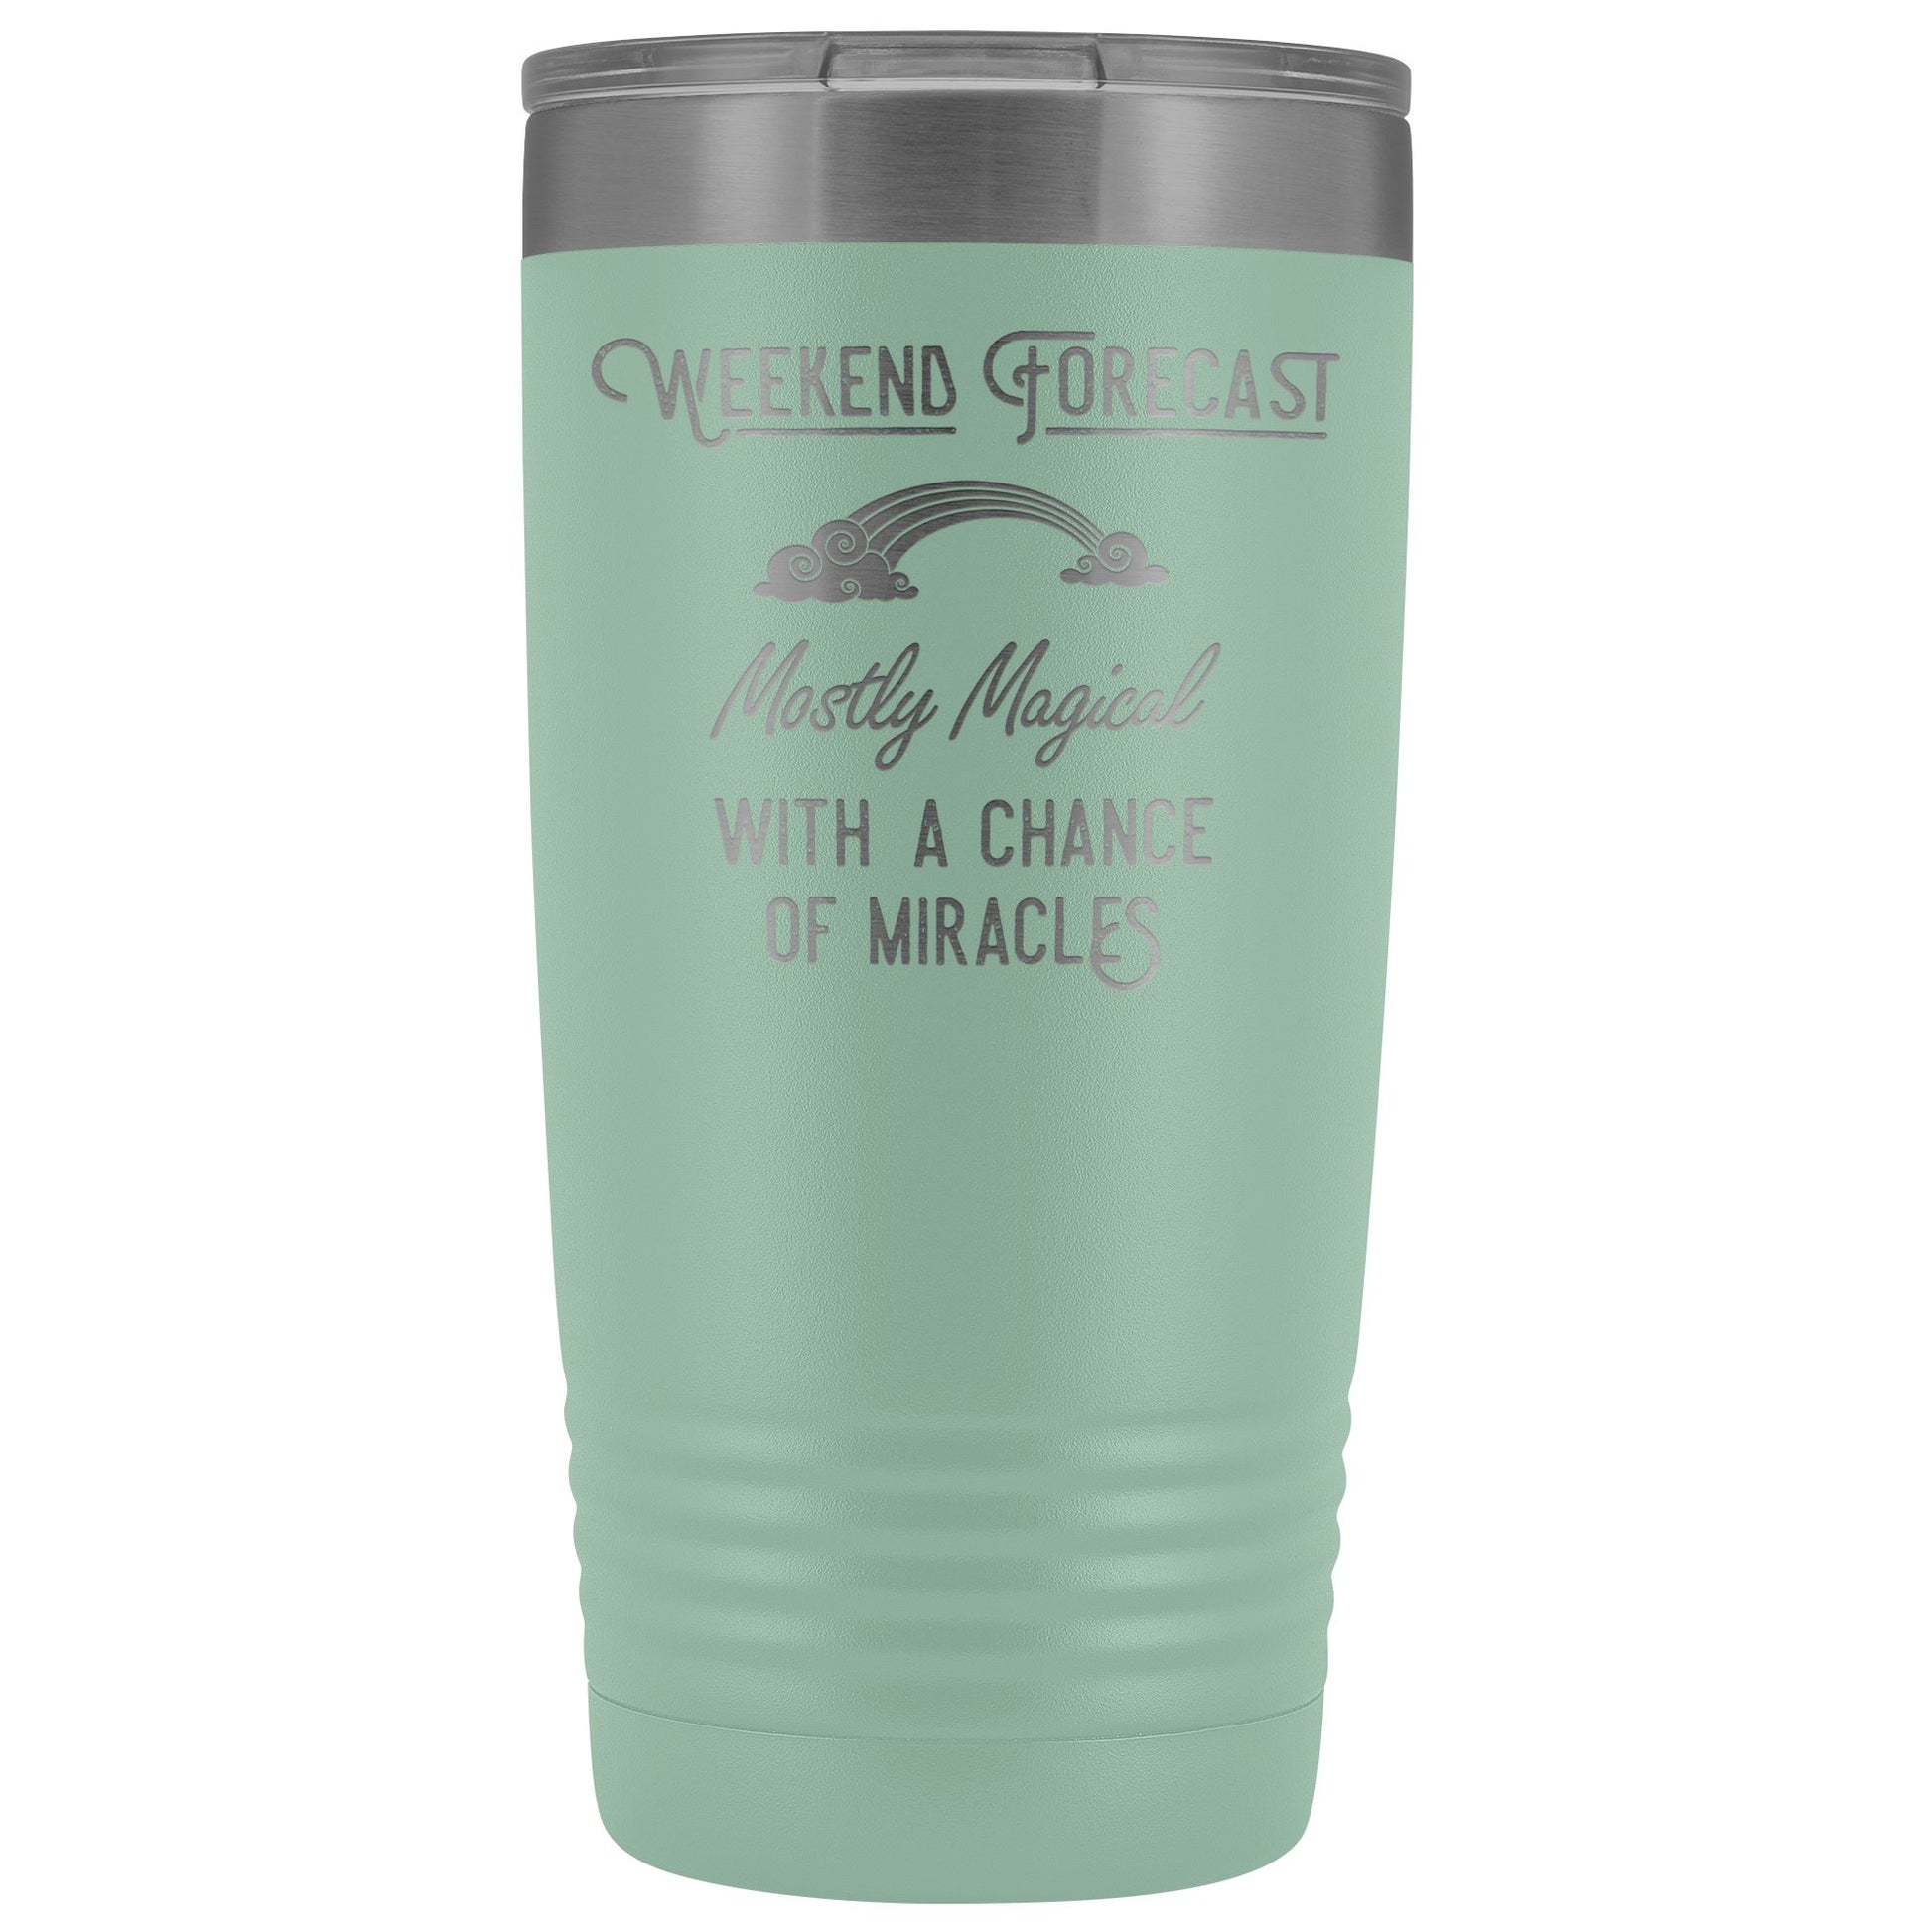 Weekend Forecast: Mostly Magical with a Chance of Miracles Travel Coffee Mug, Insulated Mug, To go Mug